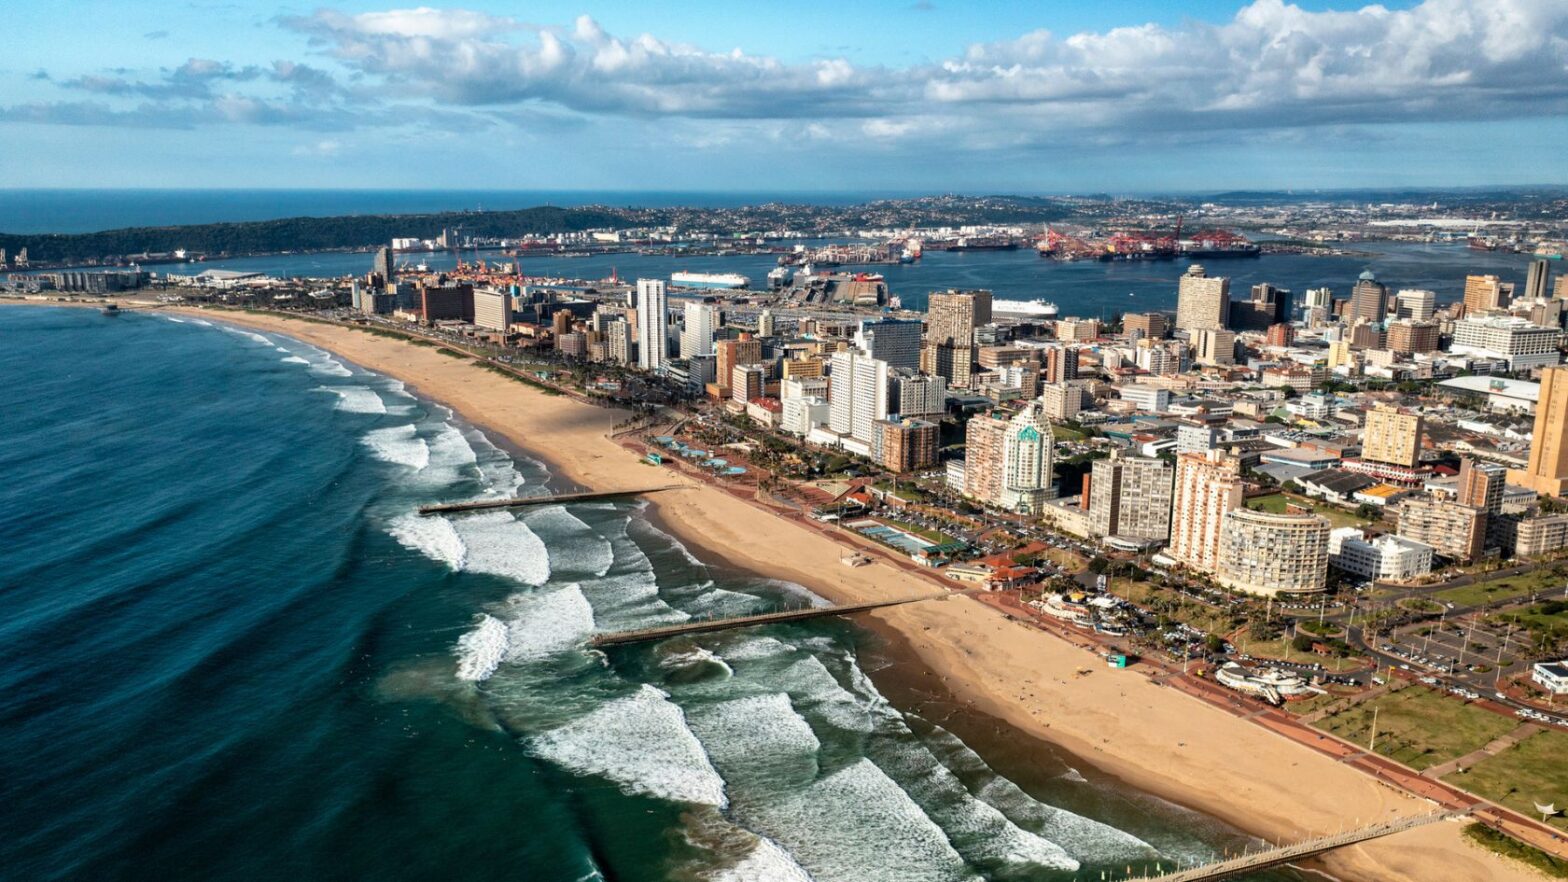 Top Attractions To Visit In Durban, South Africa